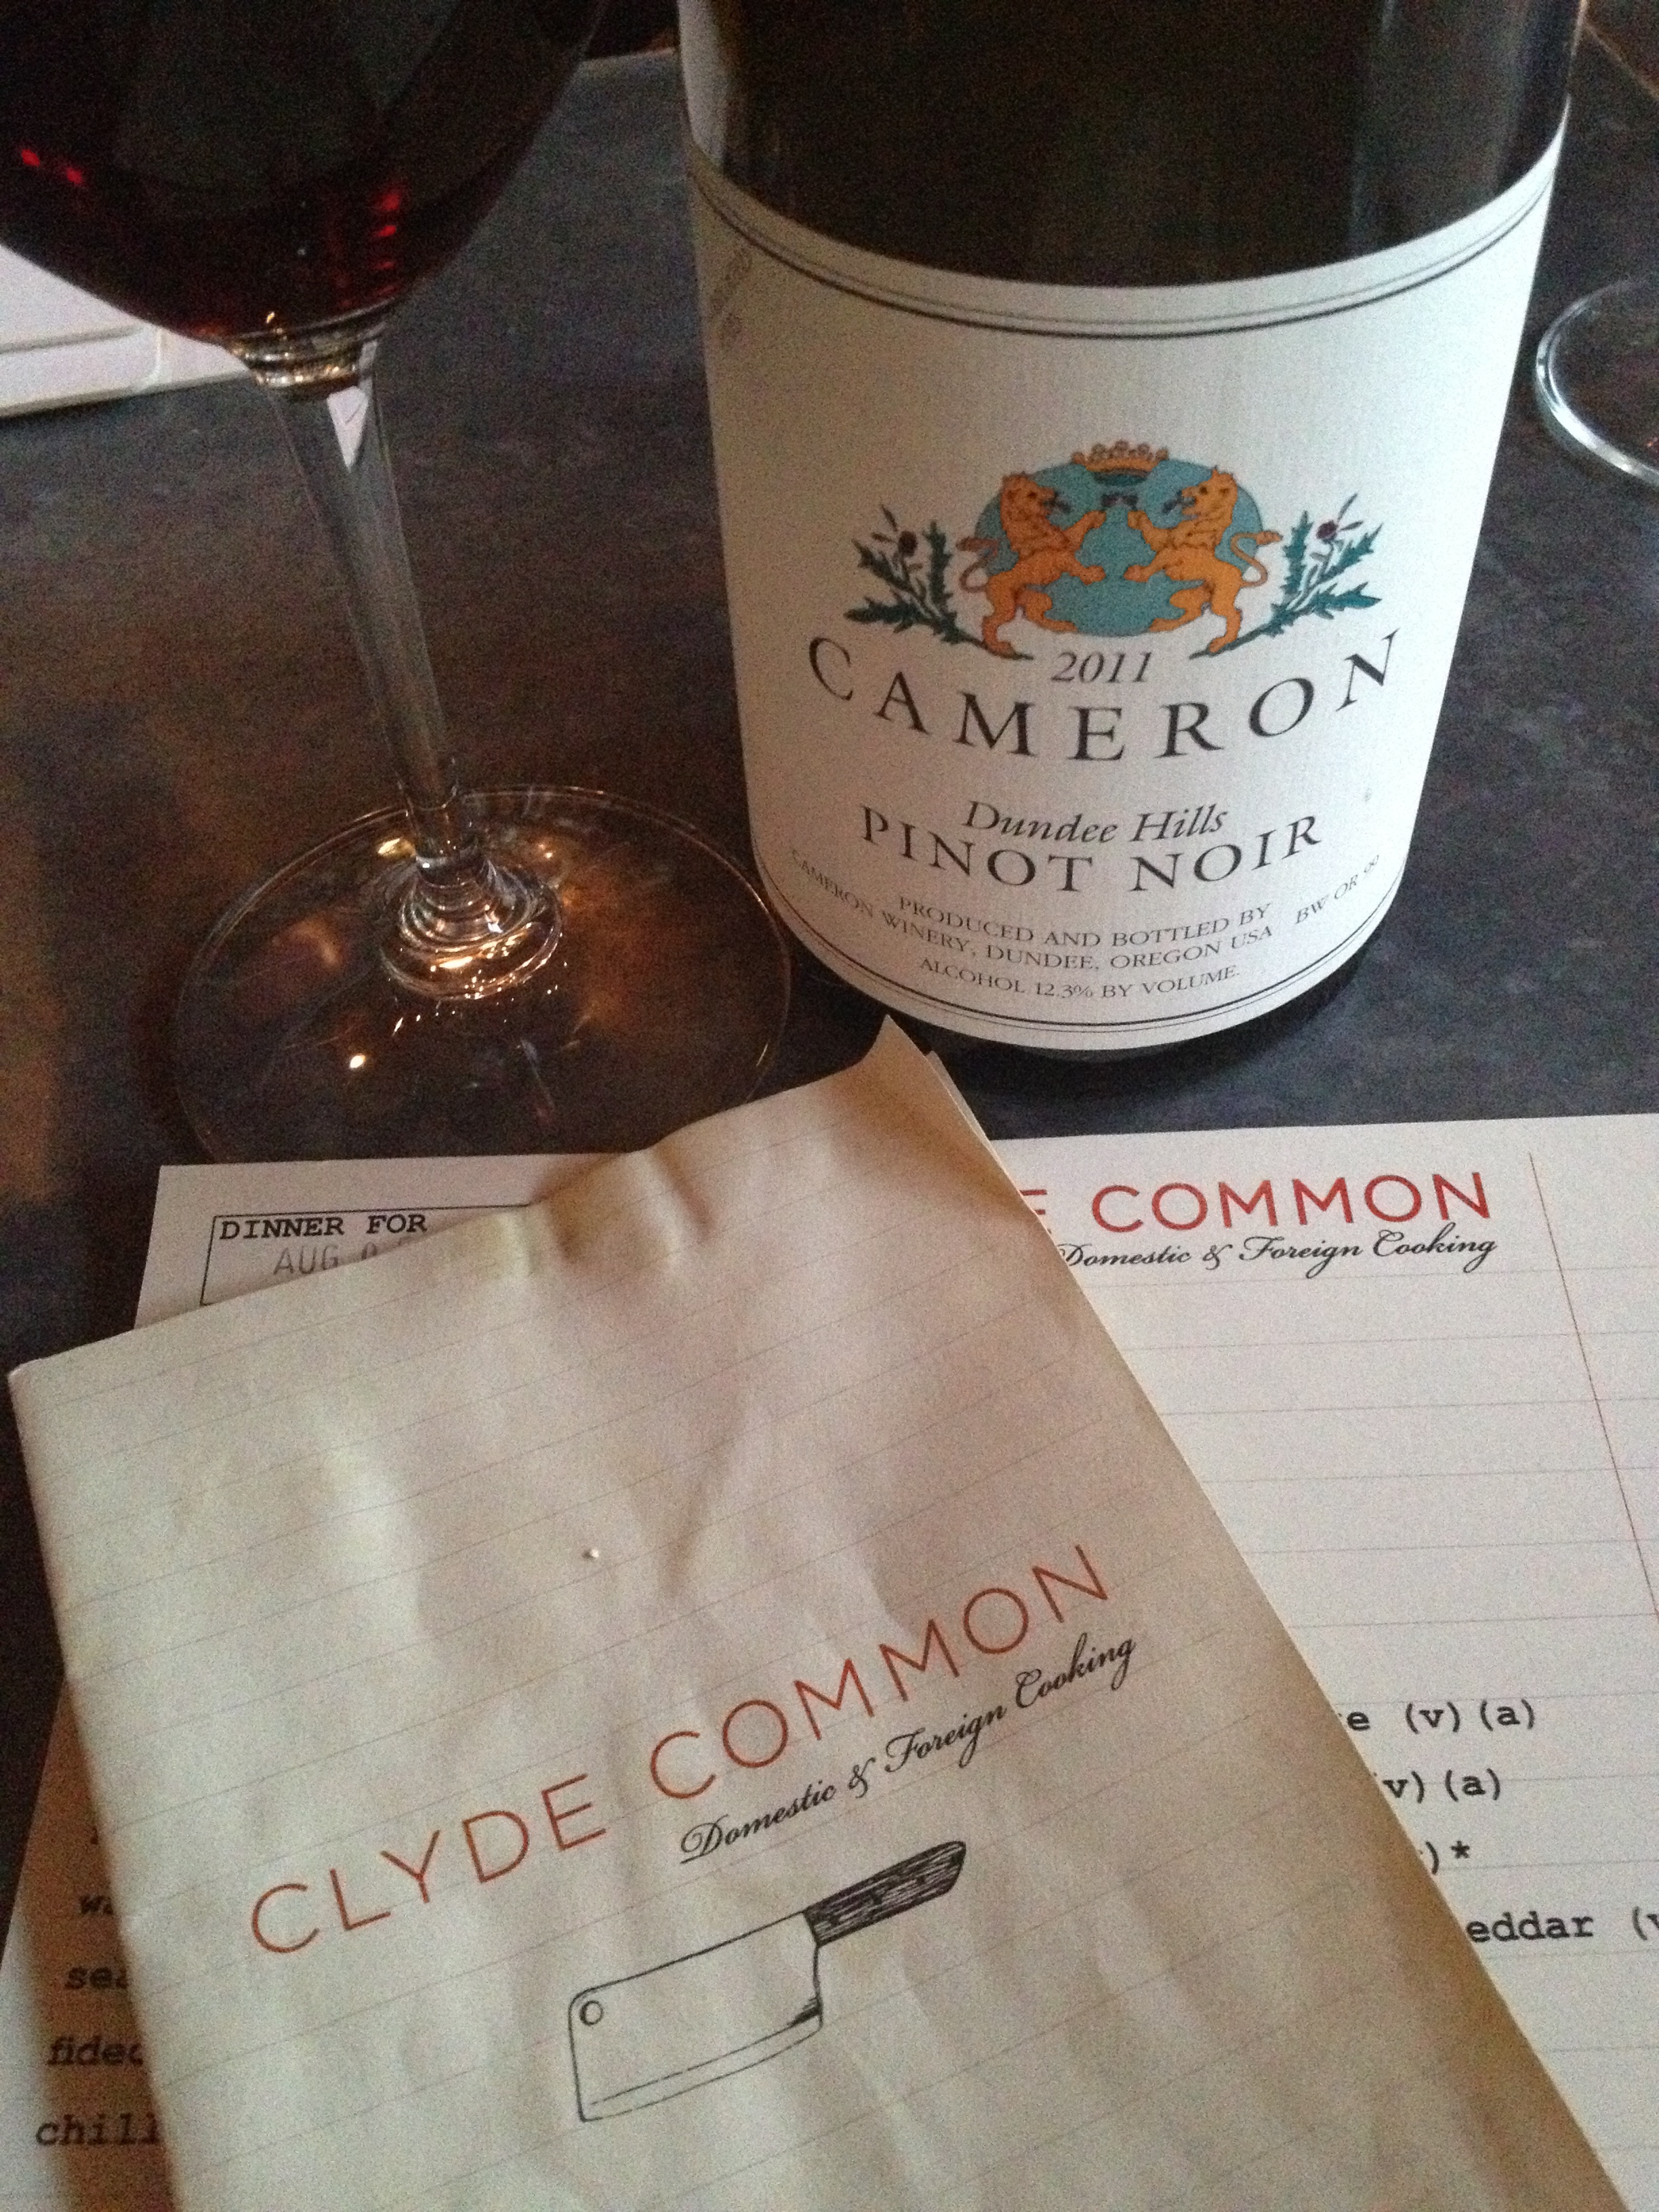  Finally found someone pouring the elusive Cameron Dundee Hills Pinot Noir. Kudos to Clyde Common in the Ace Hotel!&nbsp; 